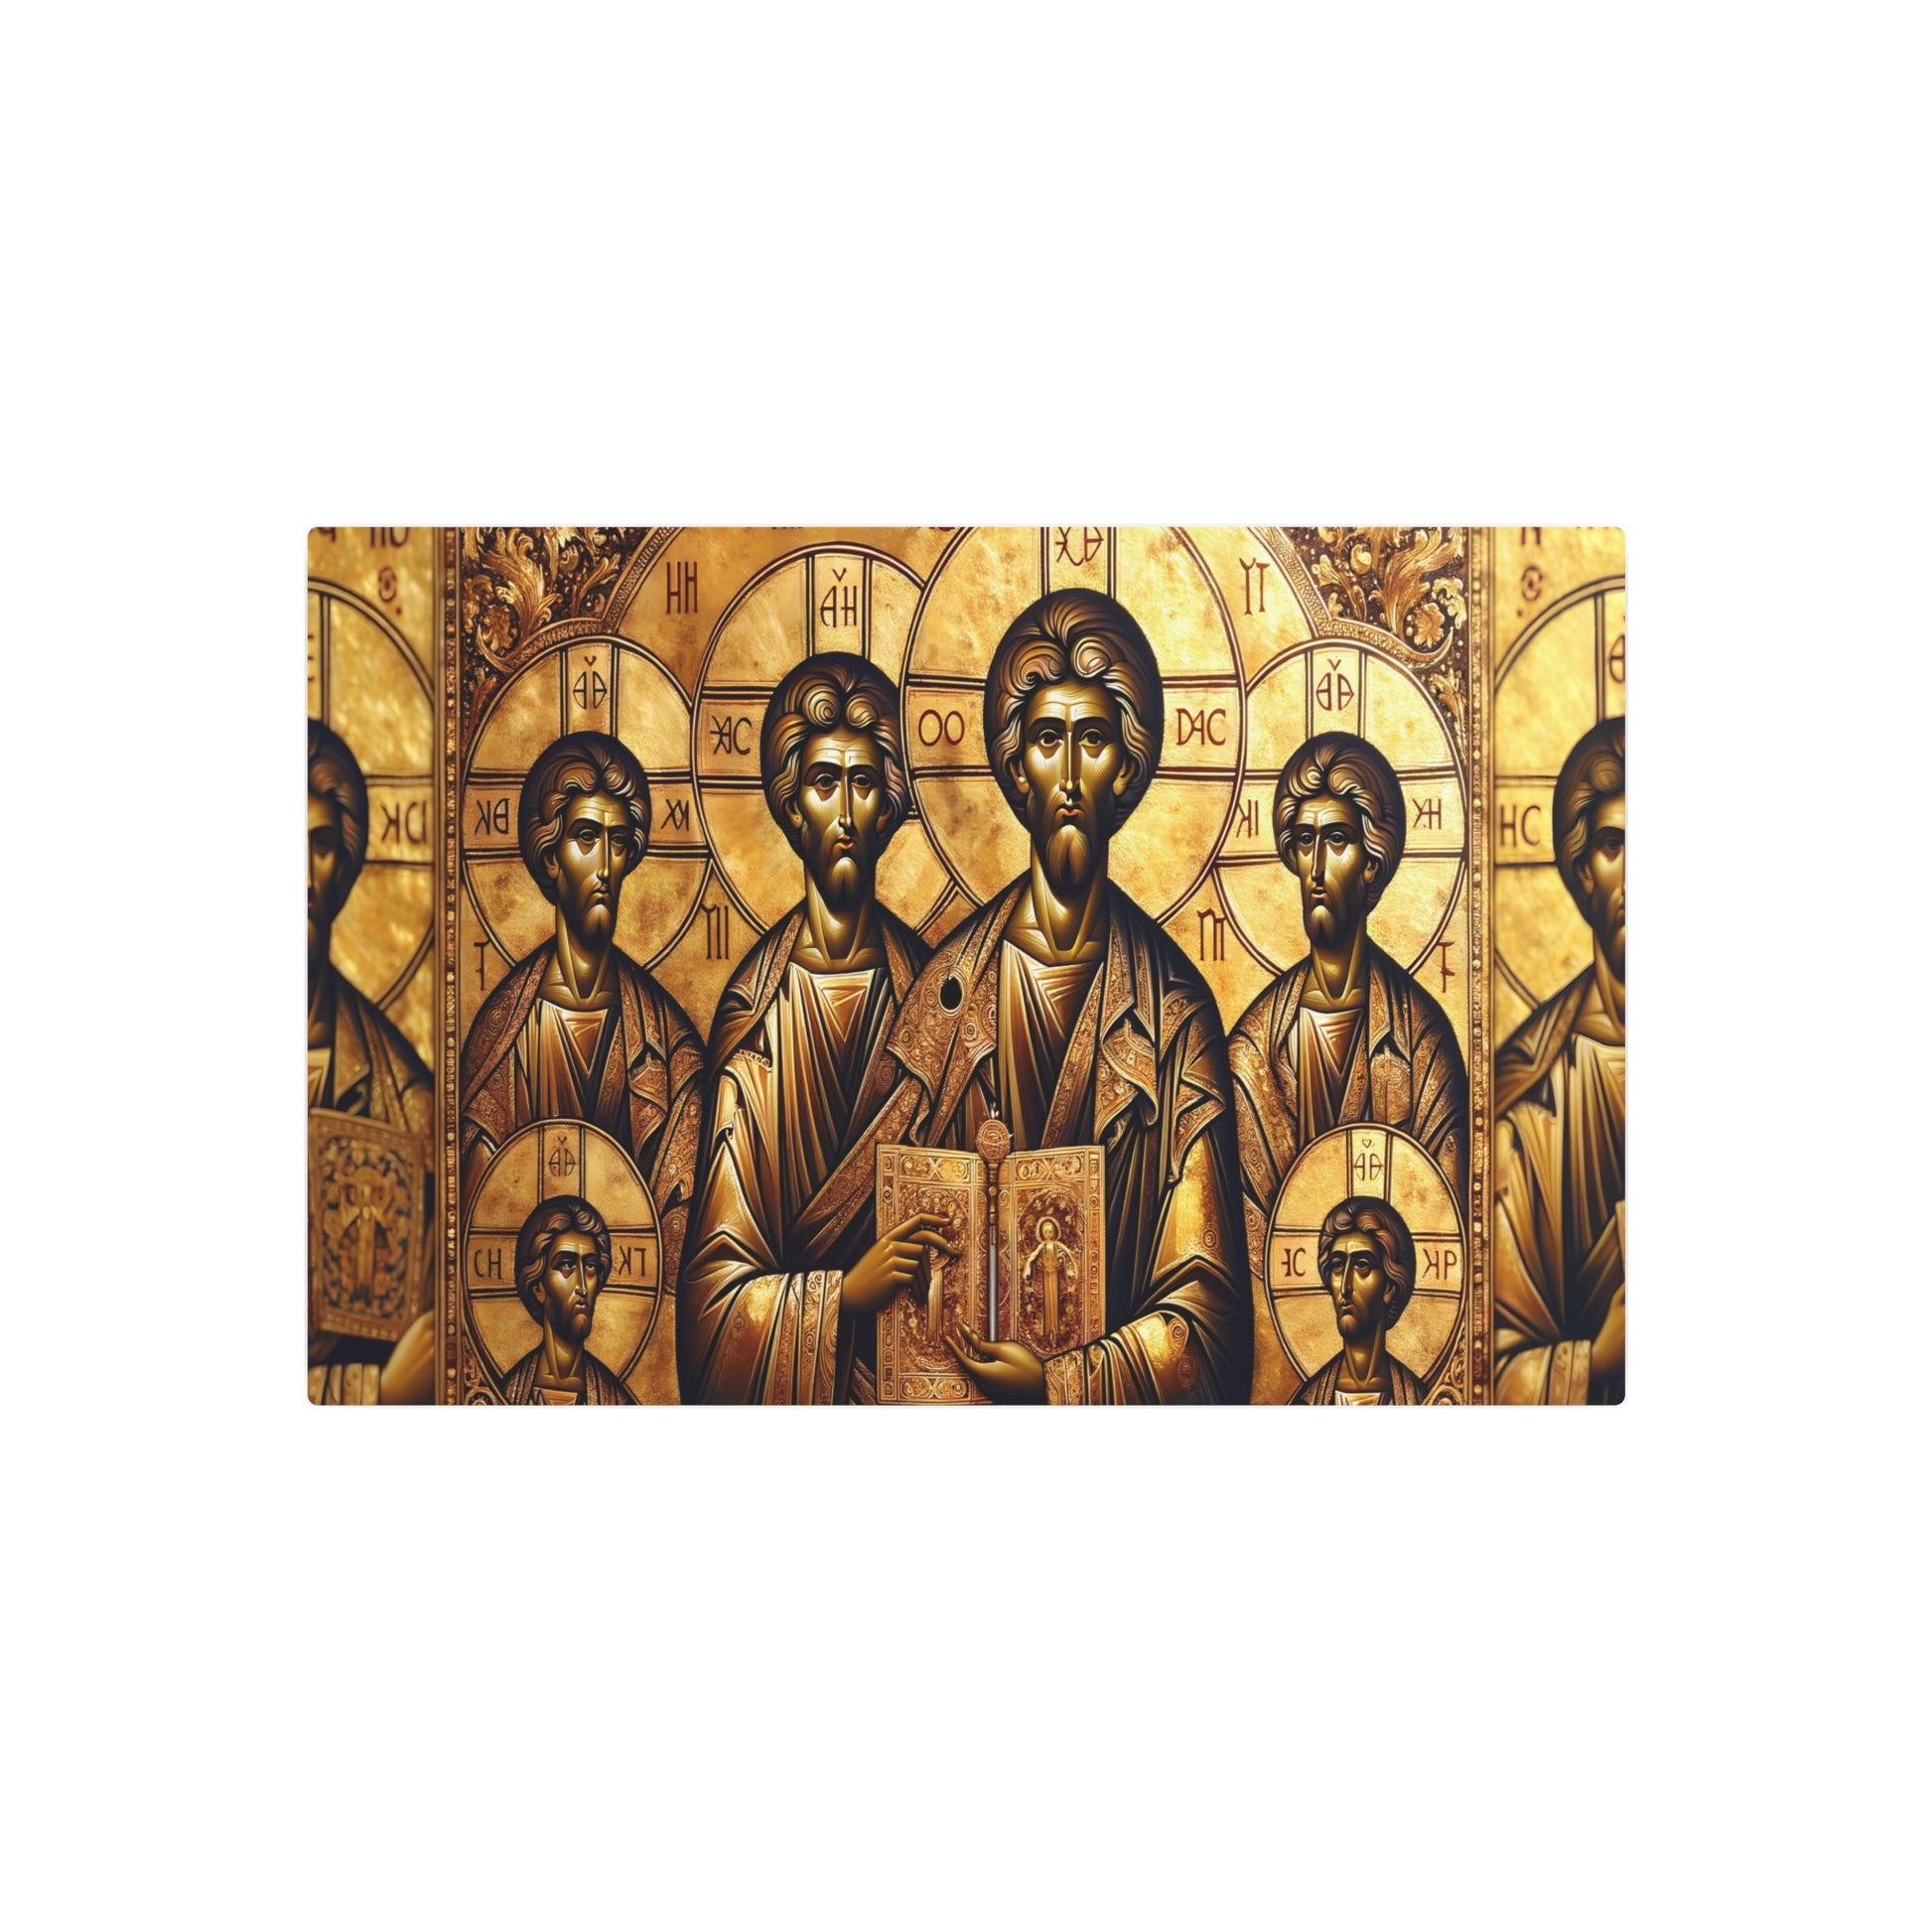 Metal Poster Art | "Byzantine Art Style Image: Golden Backdrop with Detailed Religious Figures - Non-Western & Global Styles" - Metal Poster Art 30″ x 20″ (Horizontal) 0.12''